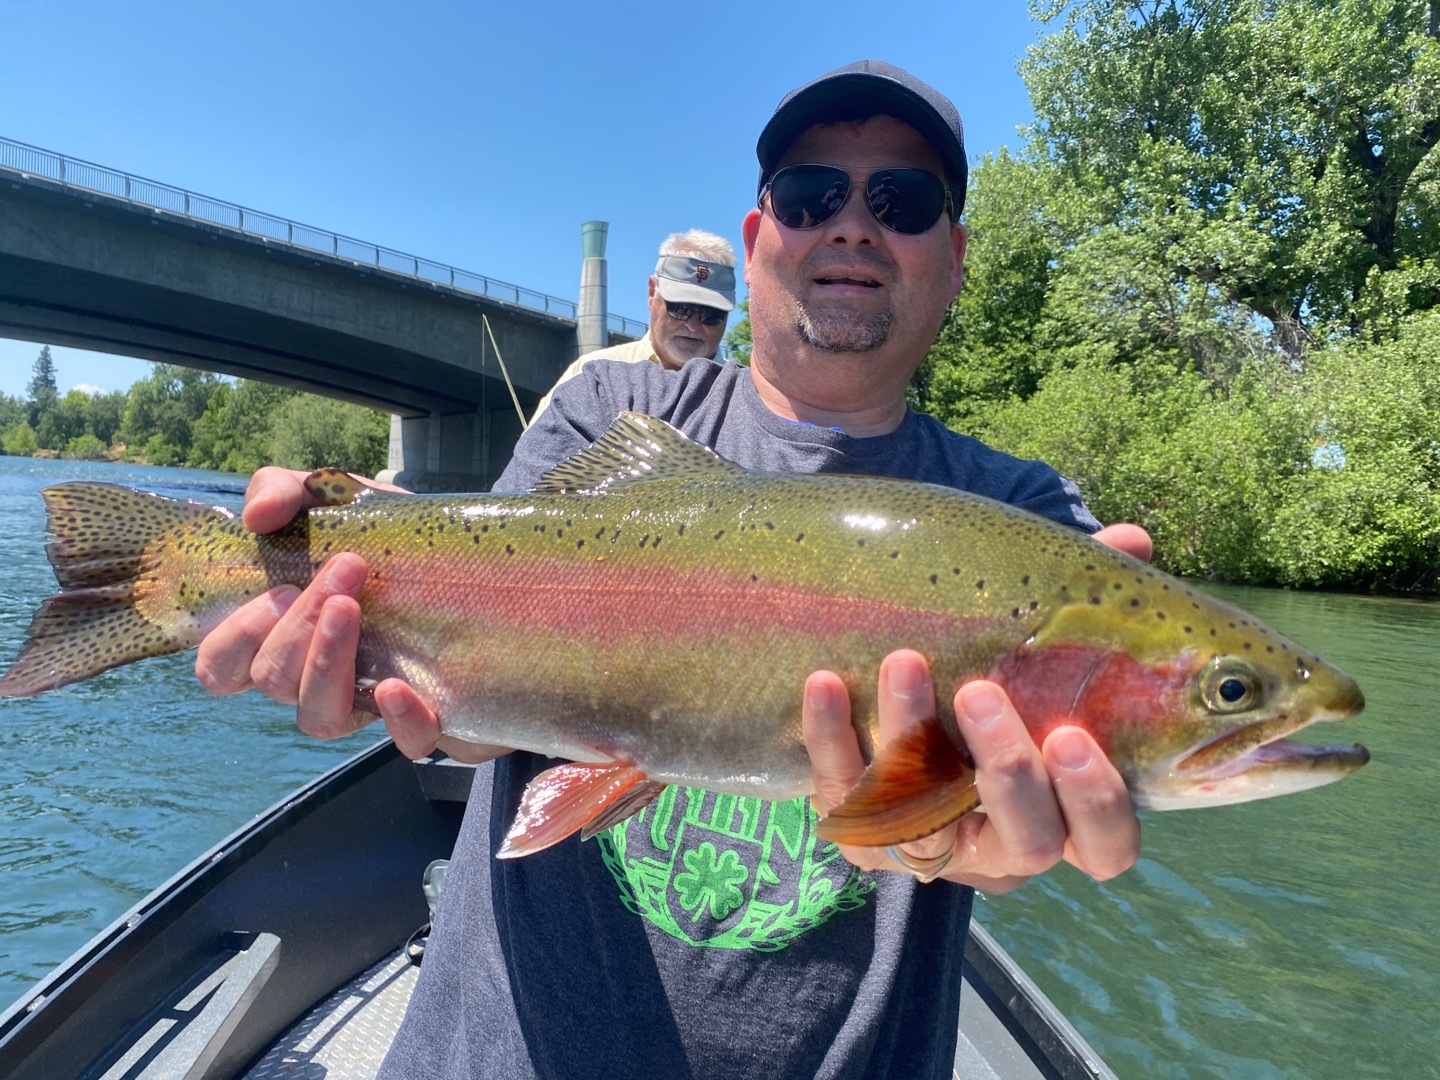 Sac River rainbows on the fly!